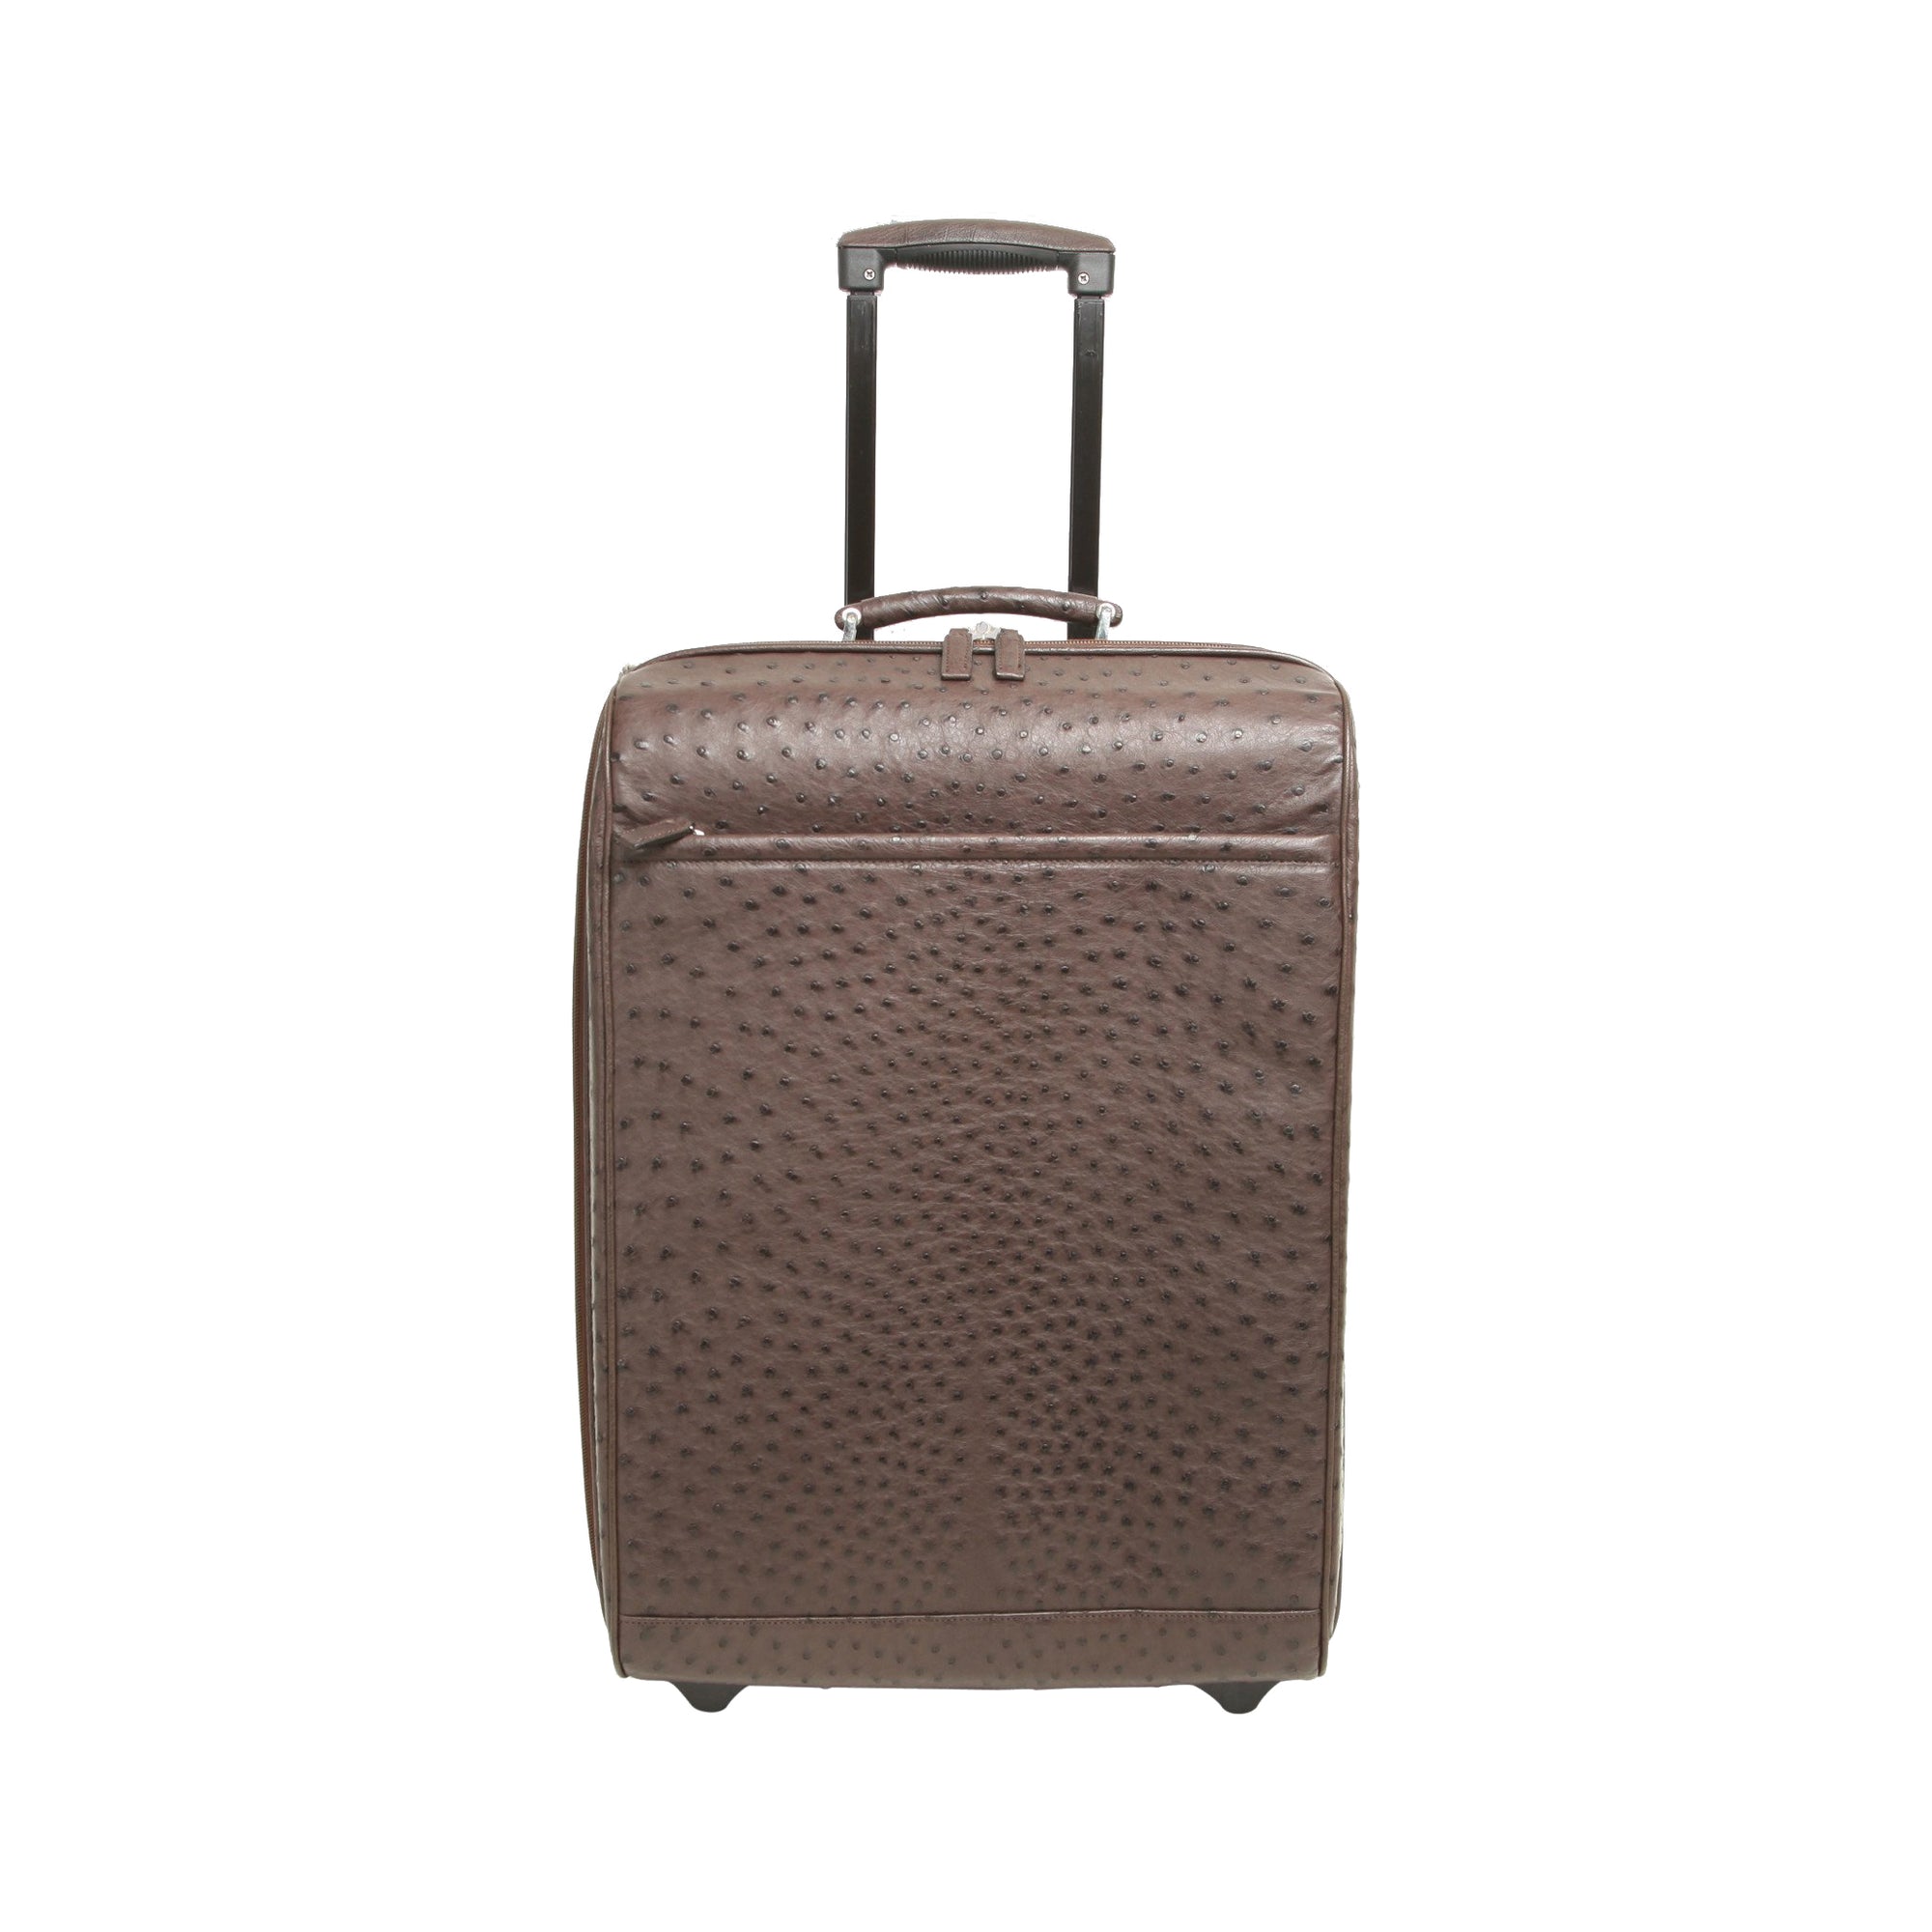 Traworld Plain Airport Luggage Bag, For Travelling at Rs 950/piece in Nagpur